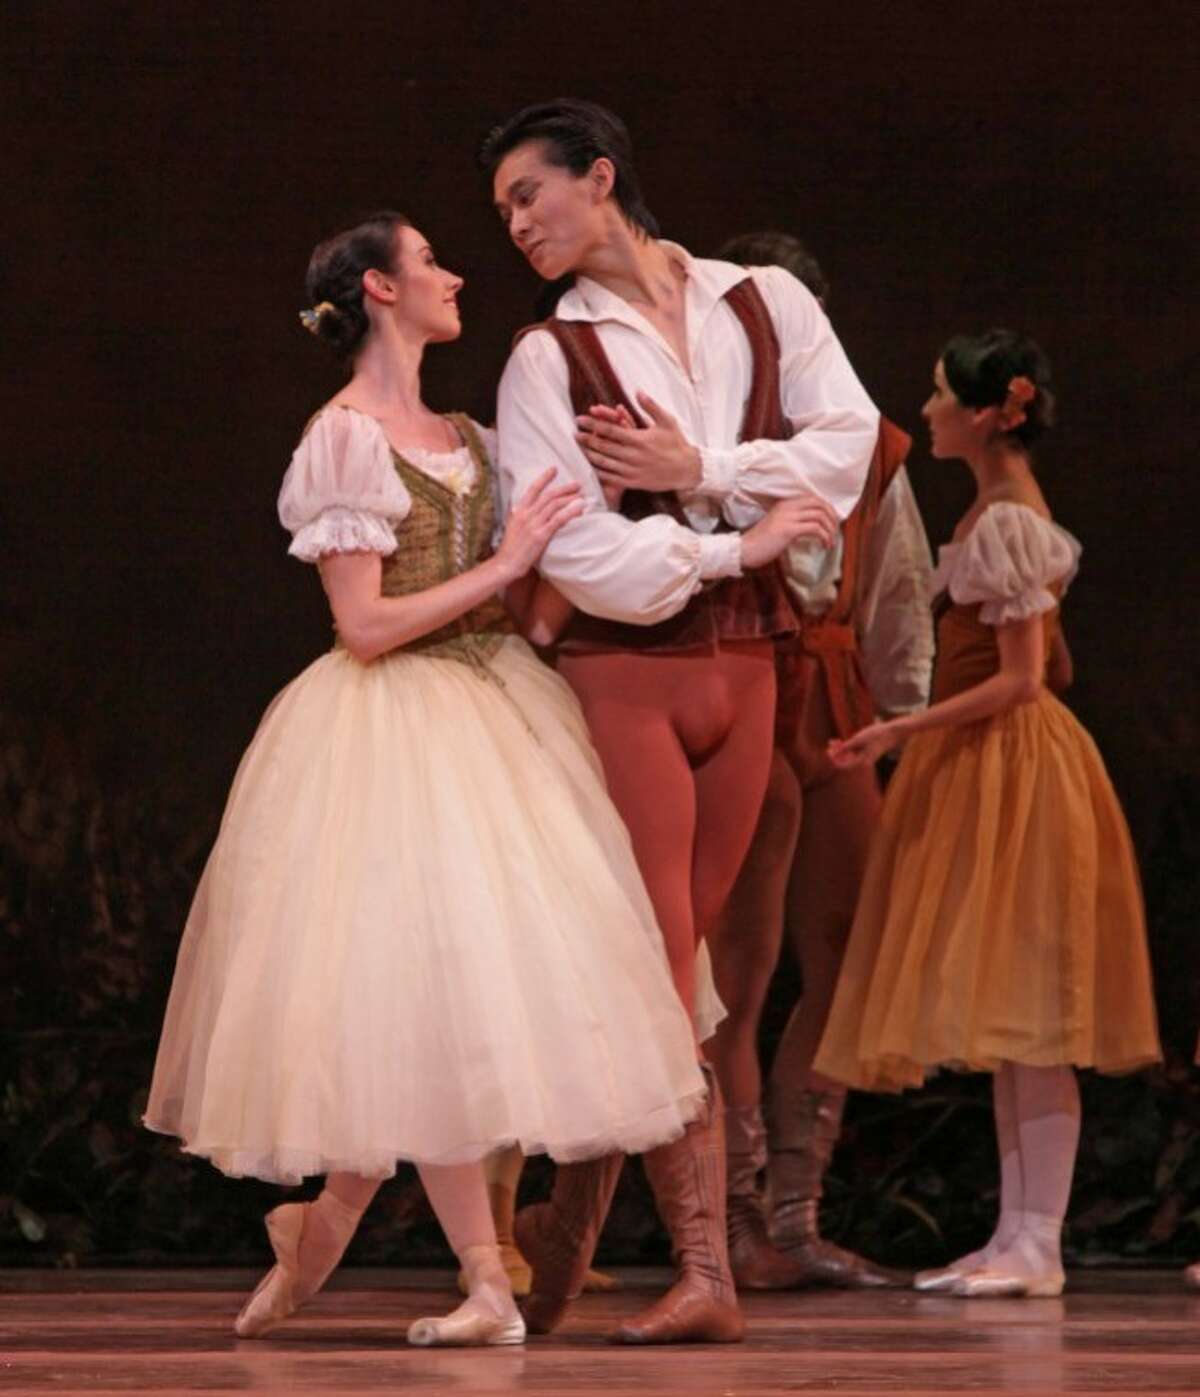 Dancers Danielle Rowe and Jun Shuang Huang in the Houston Ballet performance of "Giselle."